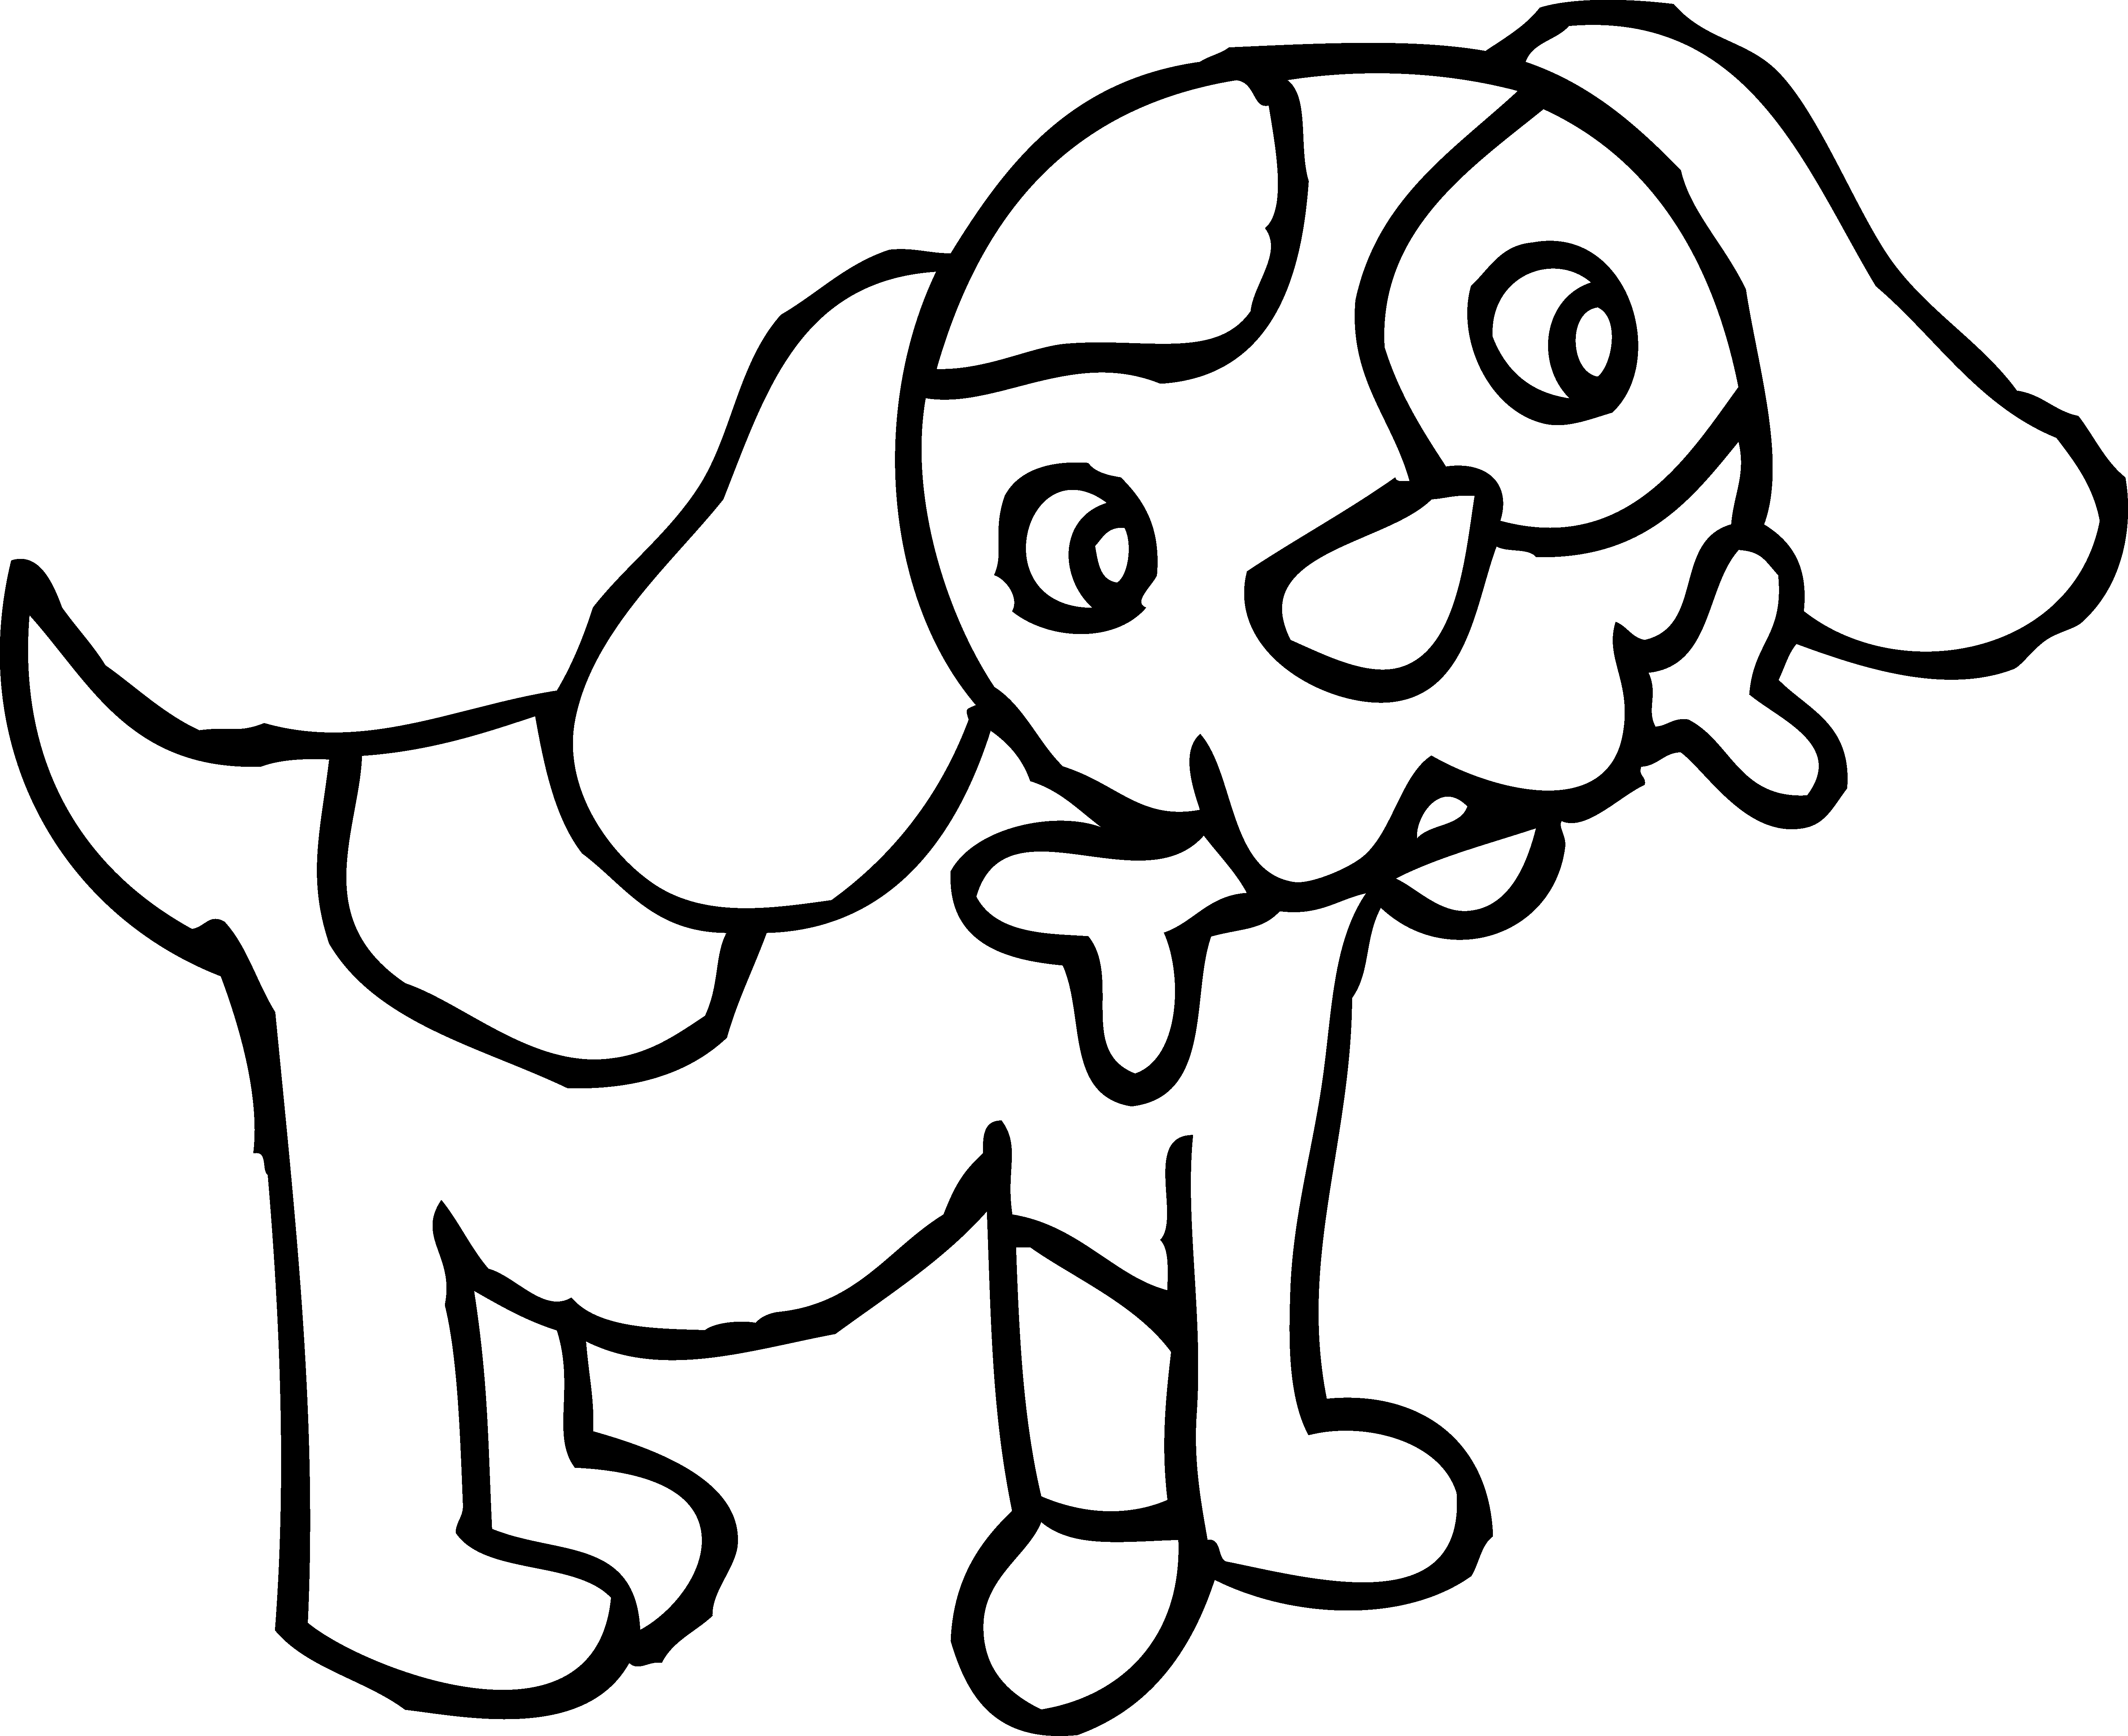 Coloring Page of Dog With Bone - Free Clip Art